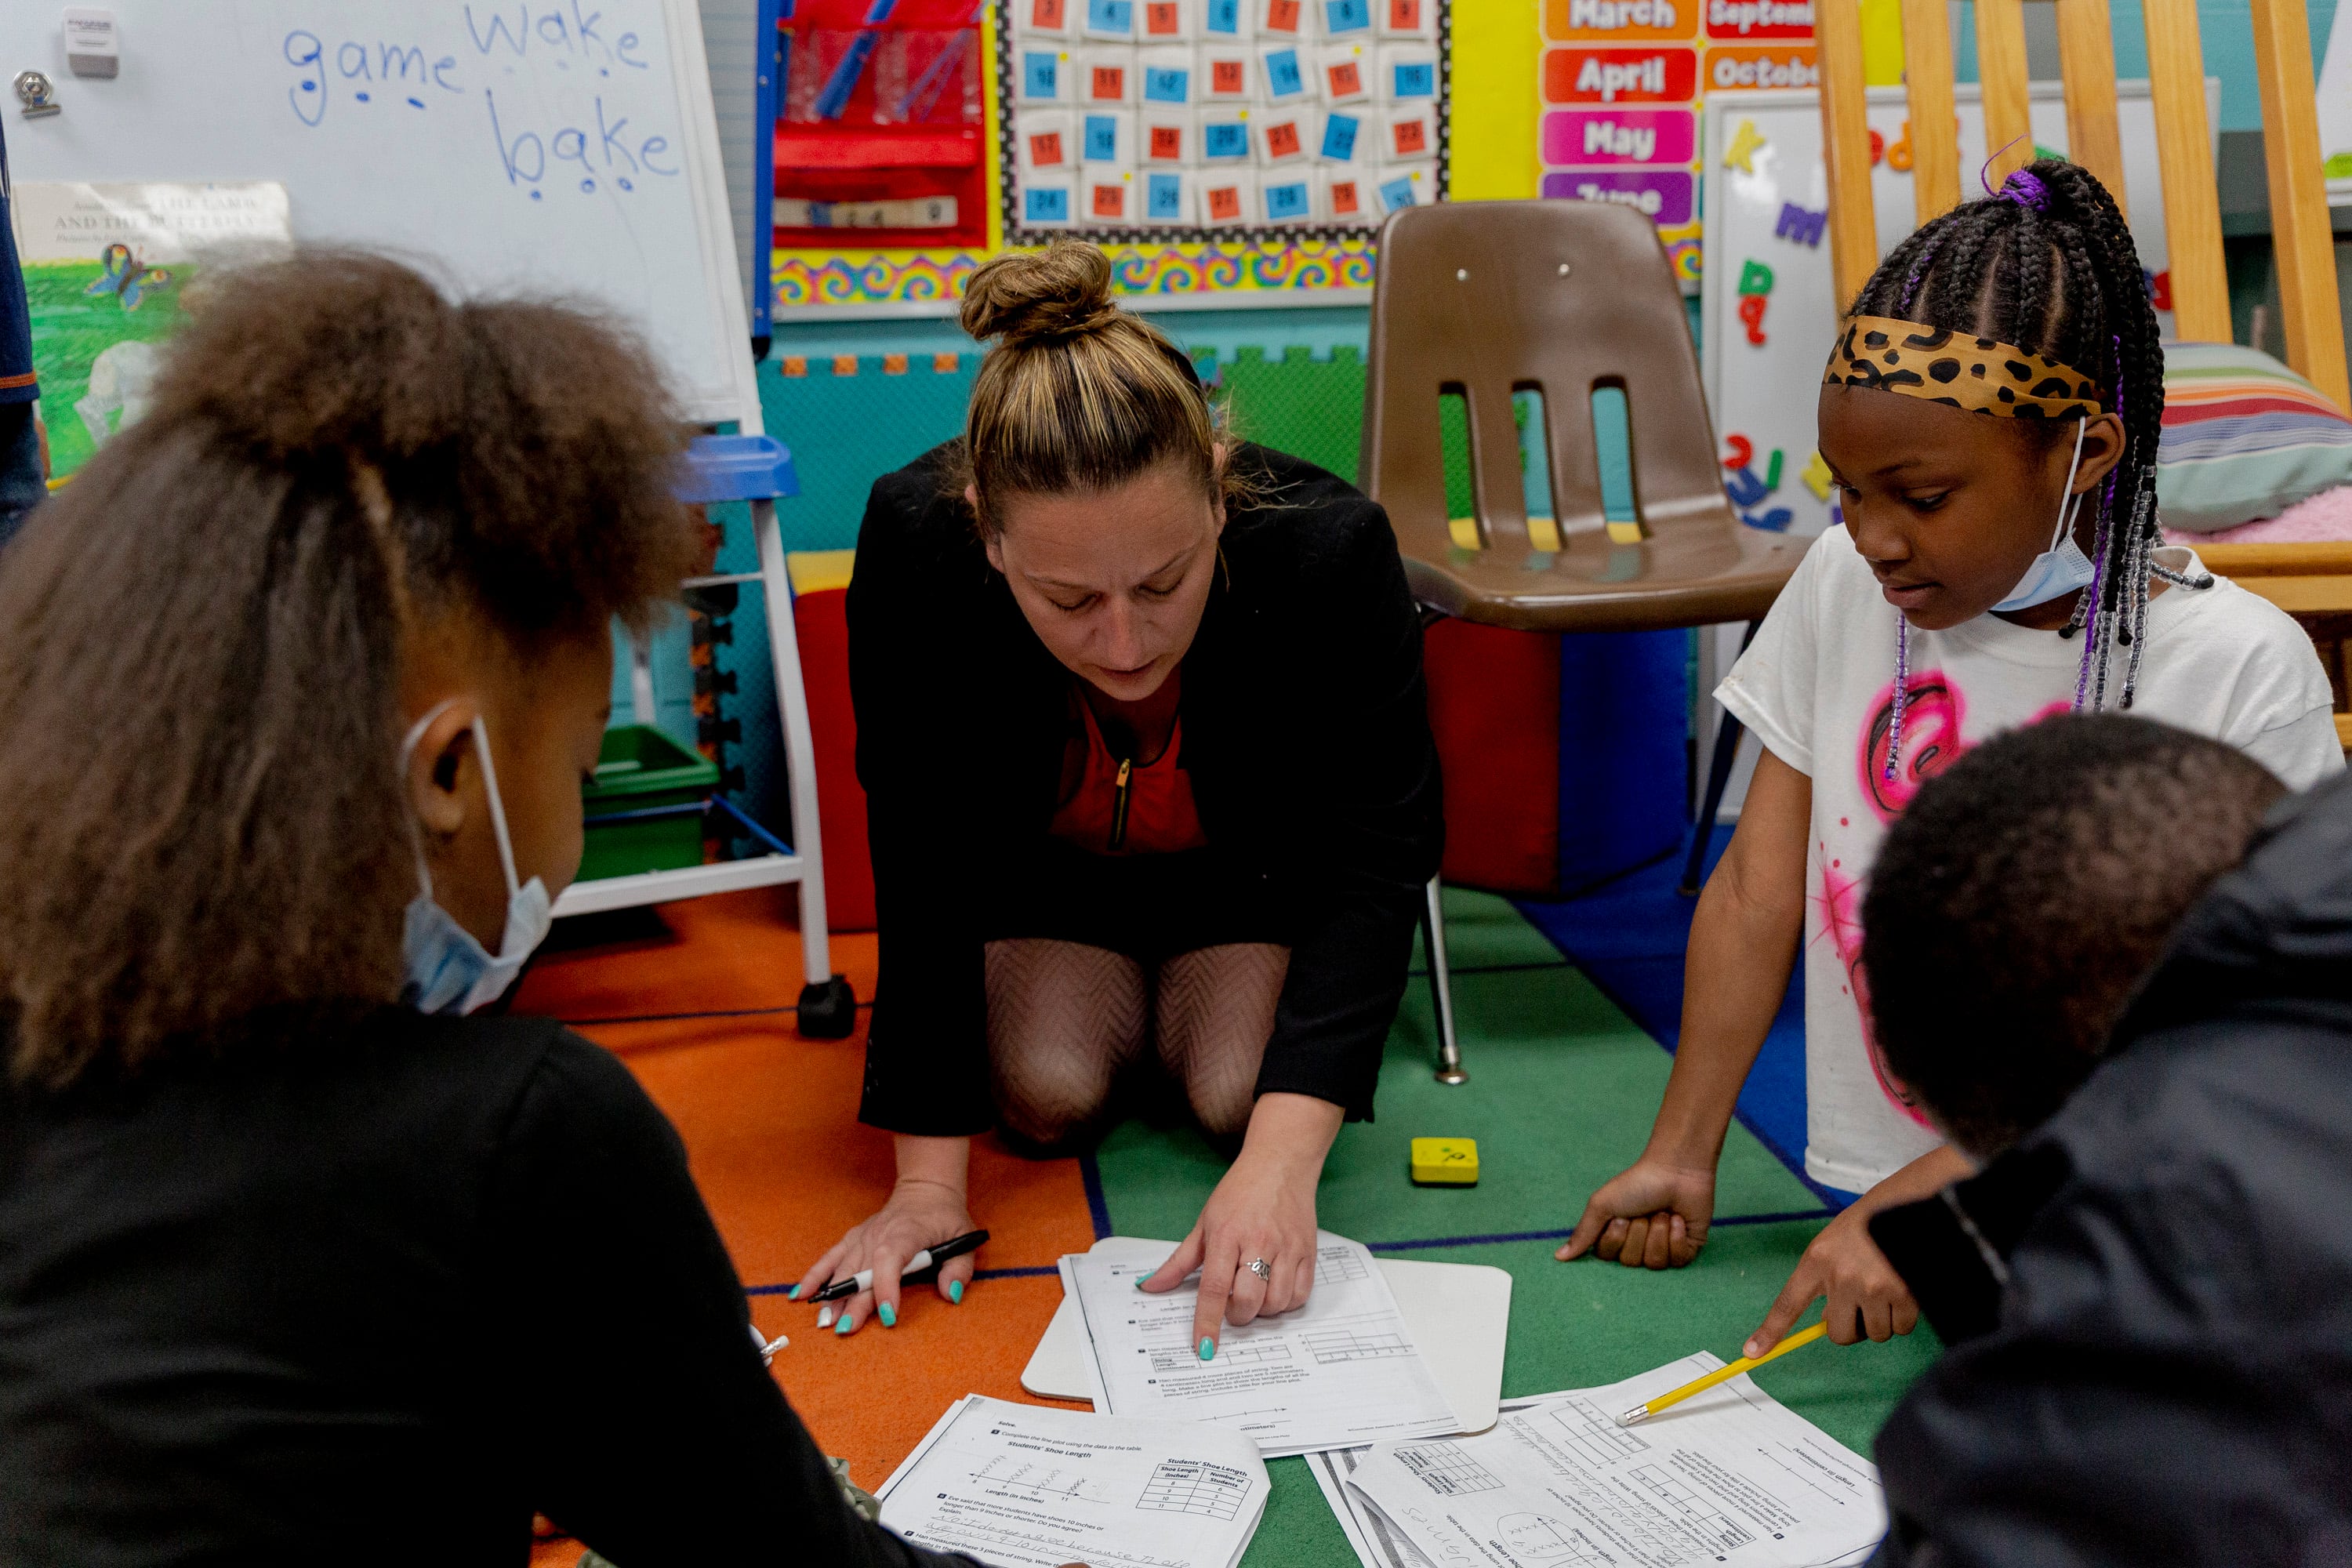 Woman wearing suit and kneeling on a colorful carpet in a classroom points to paper worksheet as a girl wearing leopard print headband looks on